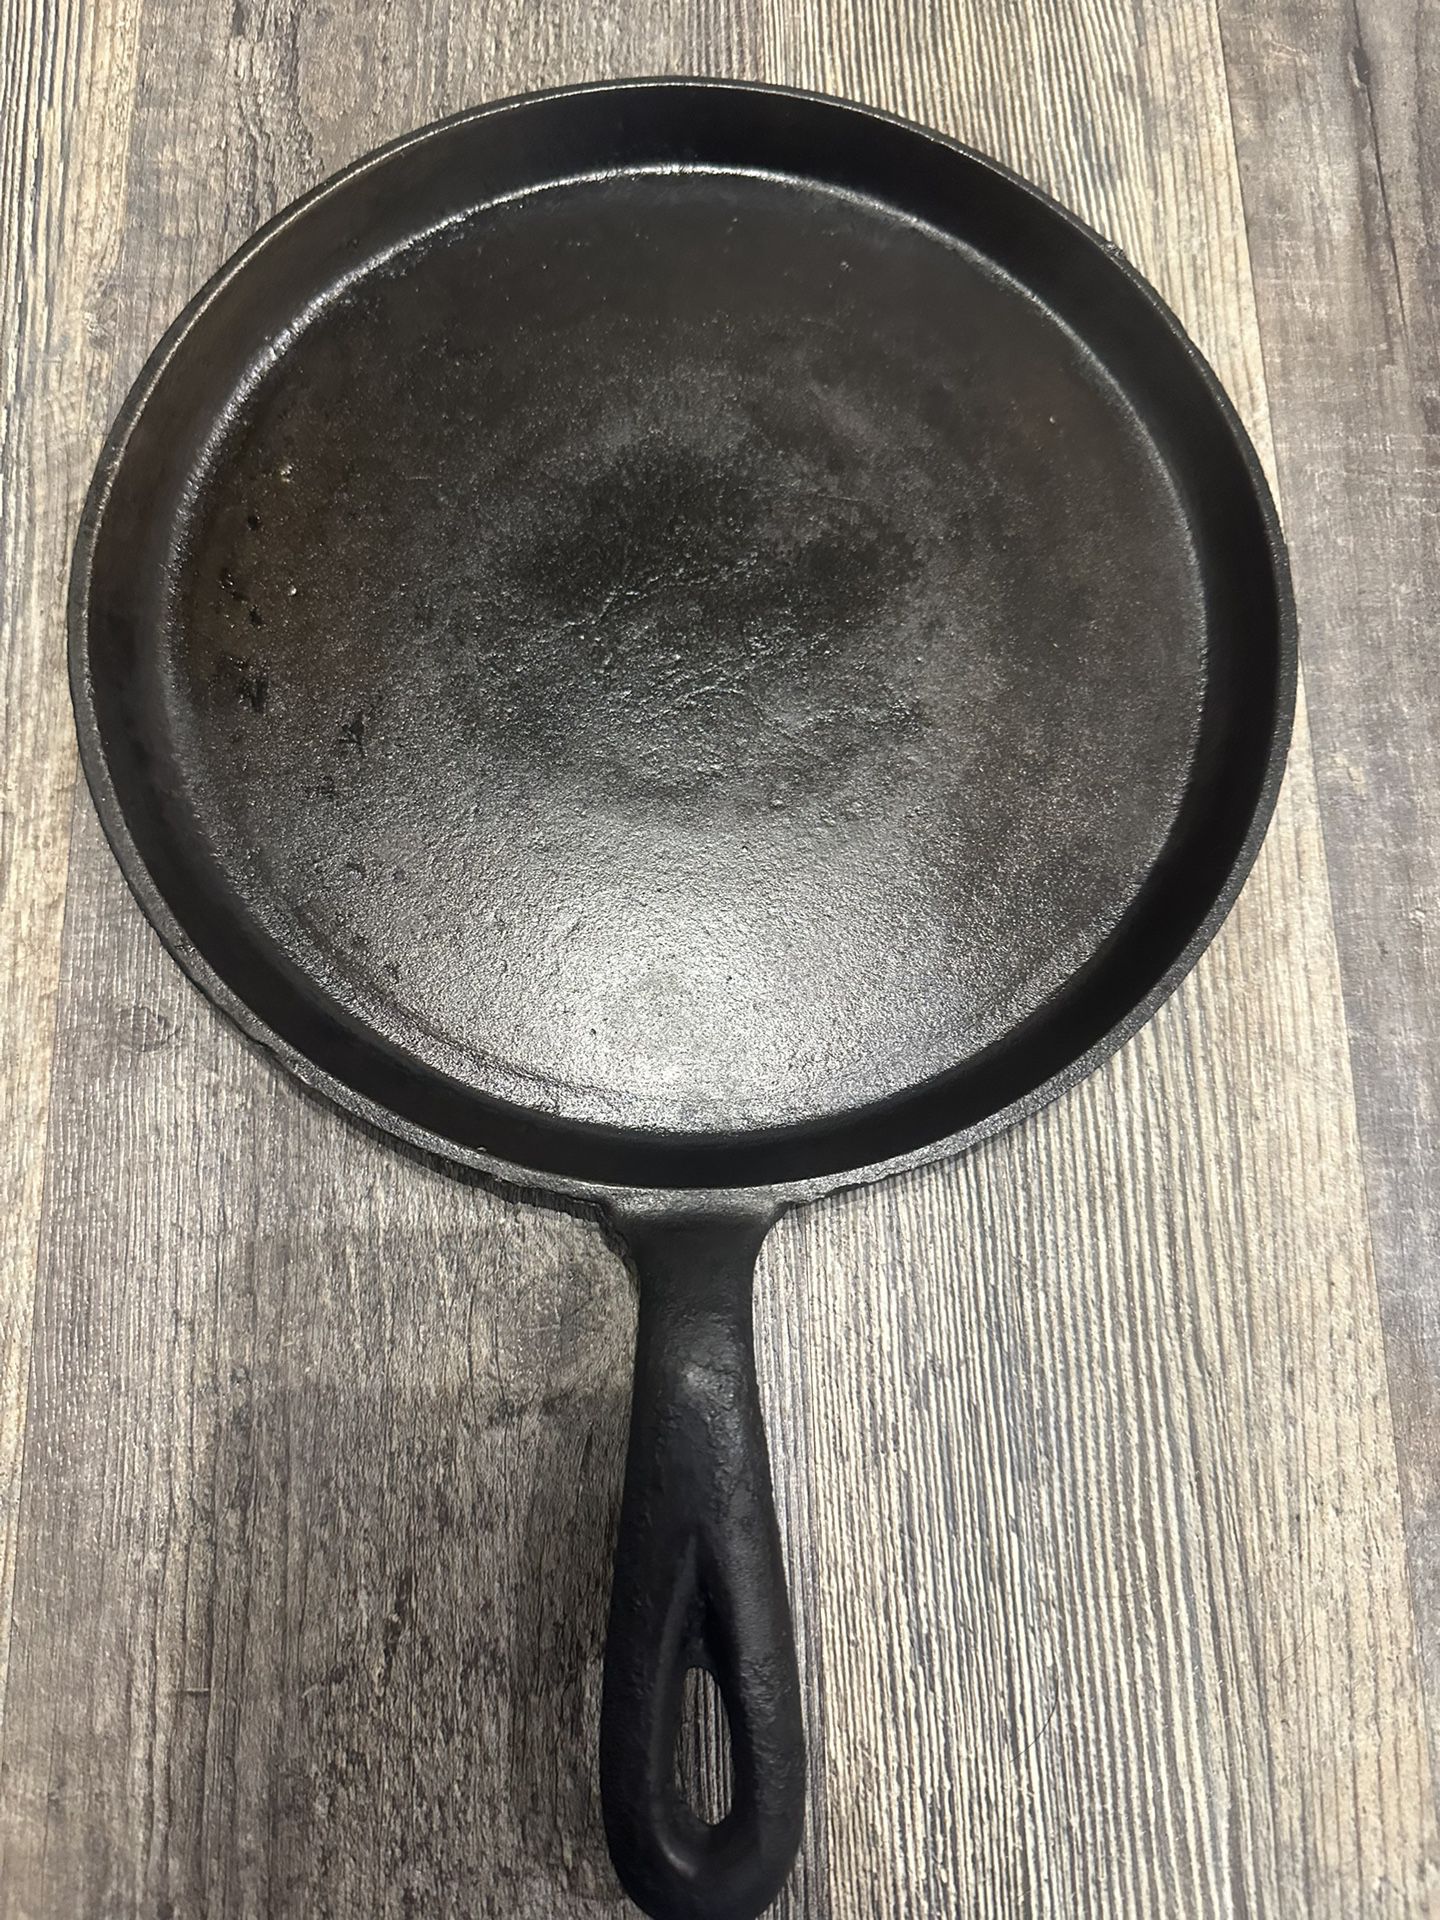 Early 1900s Lodge Griddle